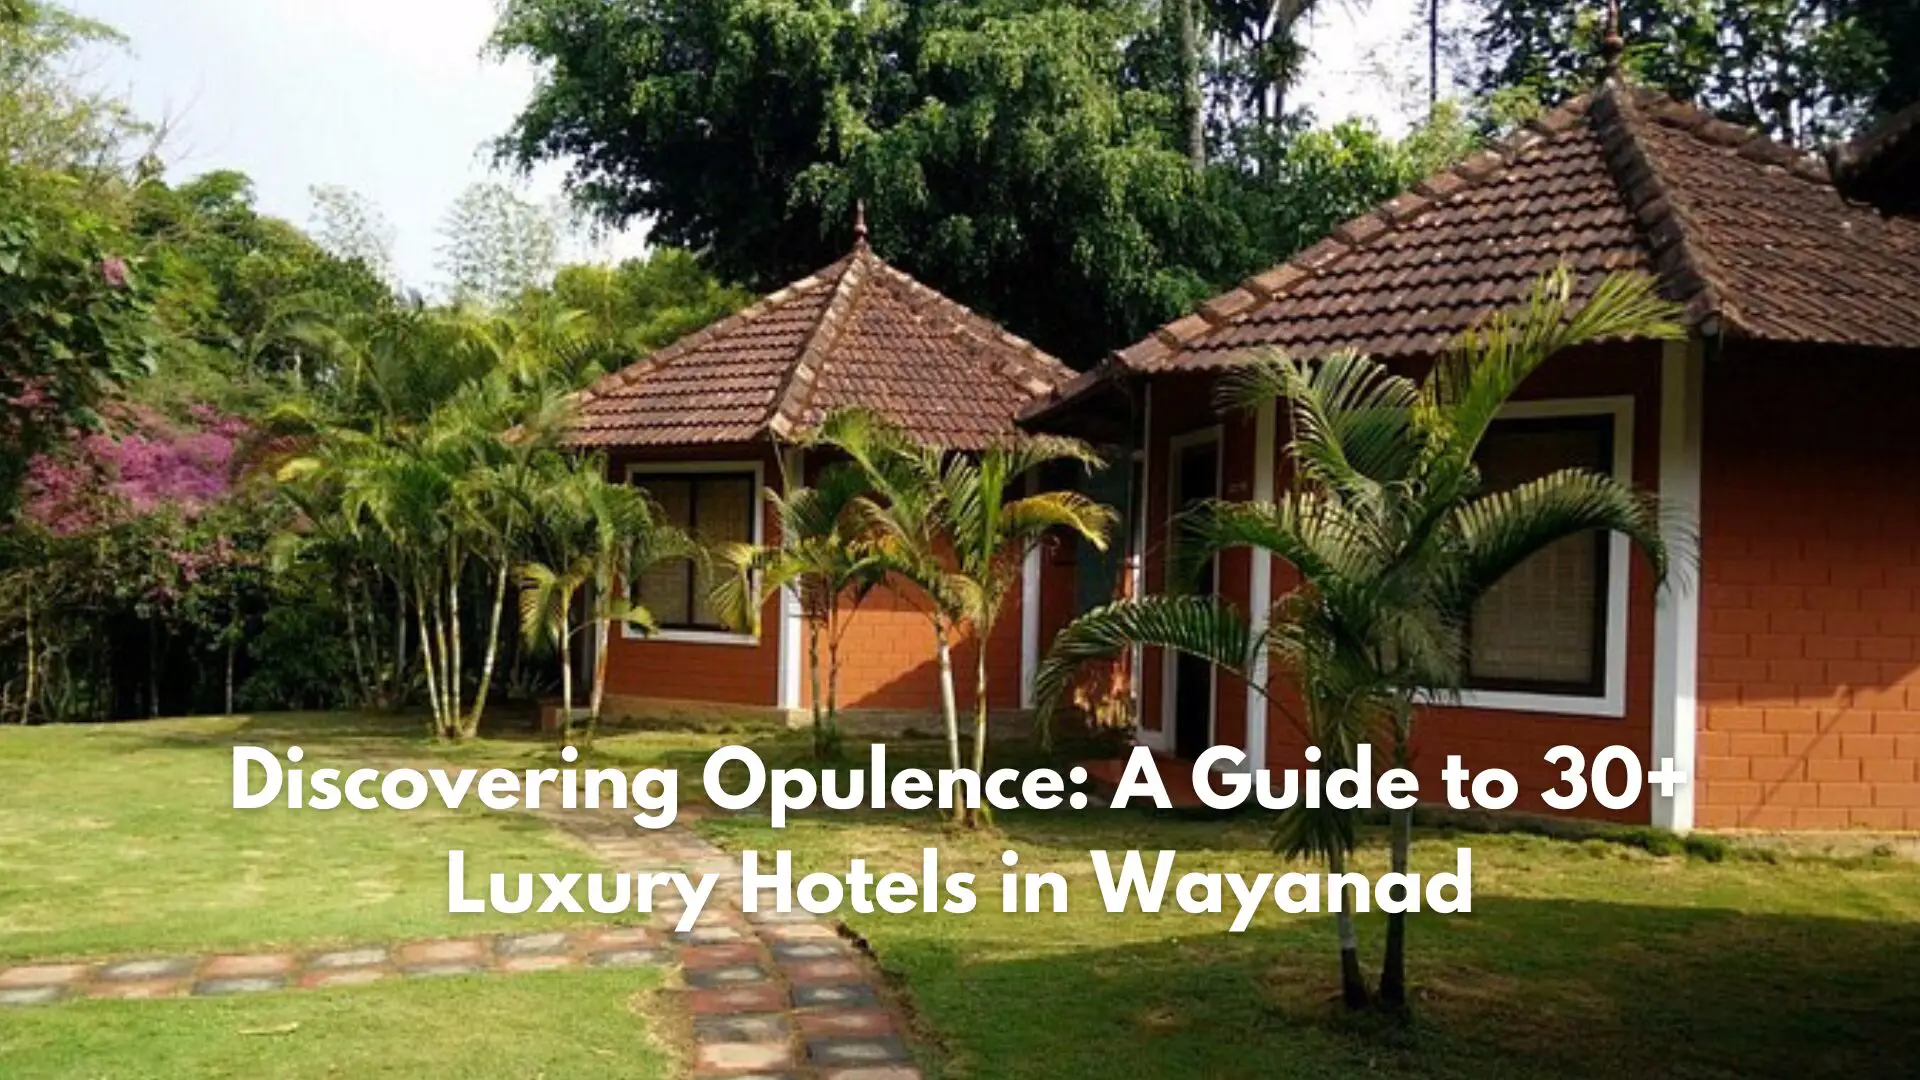 Discovering Opulence: A Guide to 30+ Luxury Hotels in Wayanad